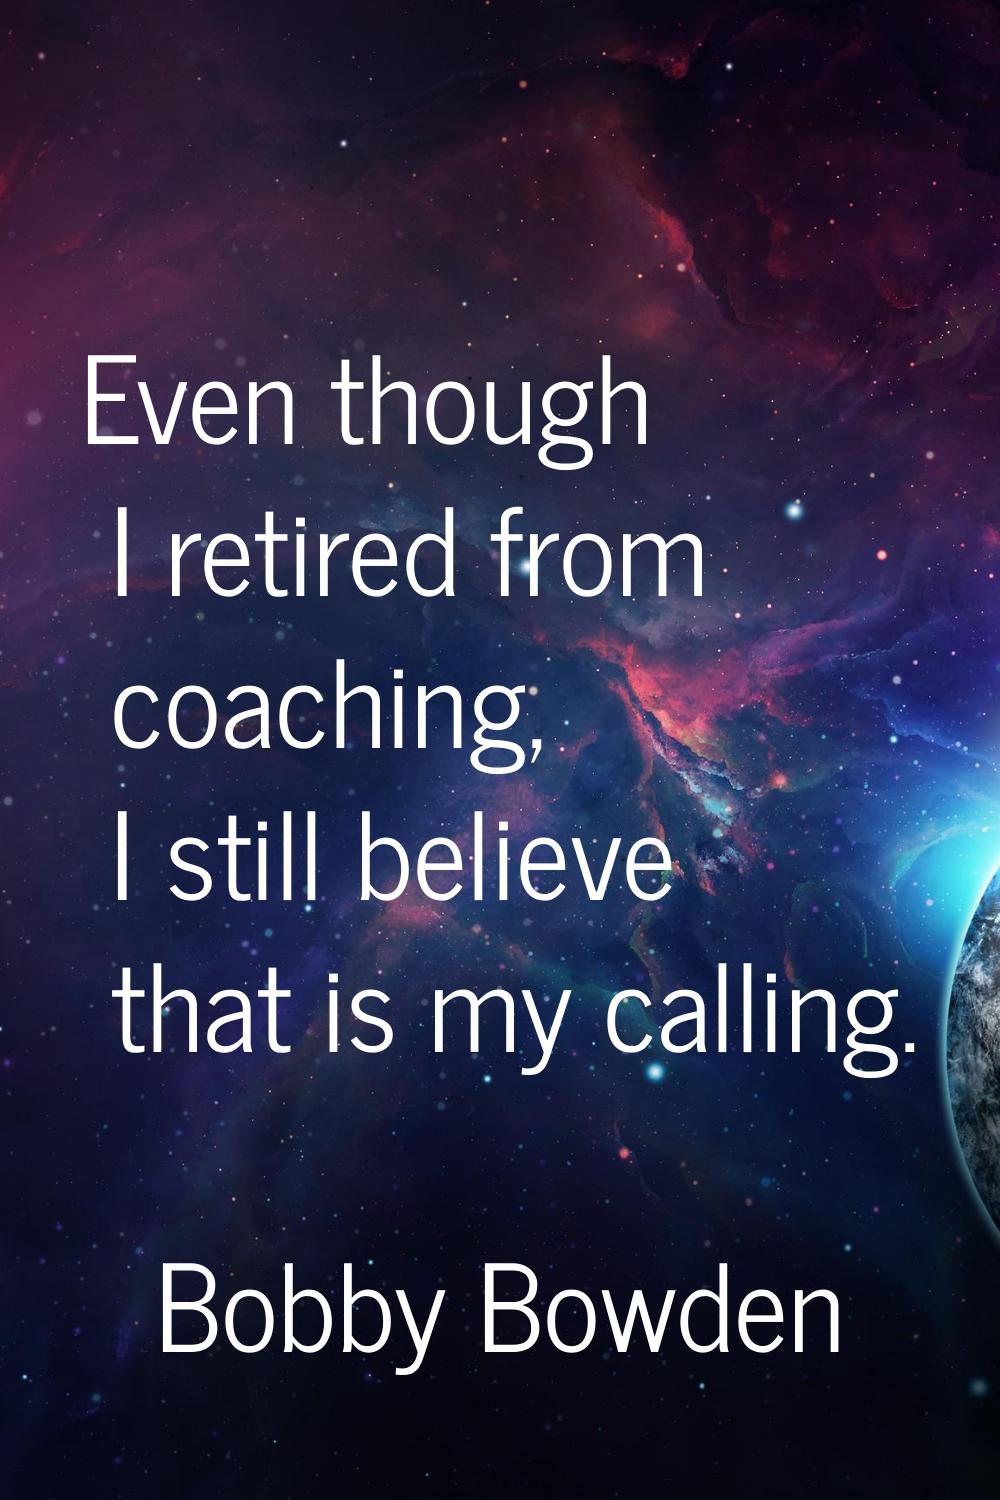 Even though I retired from coaching, I still believe that is my calling.